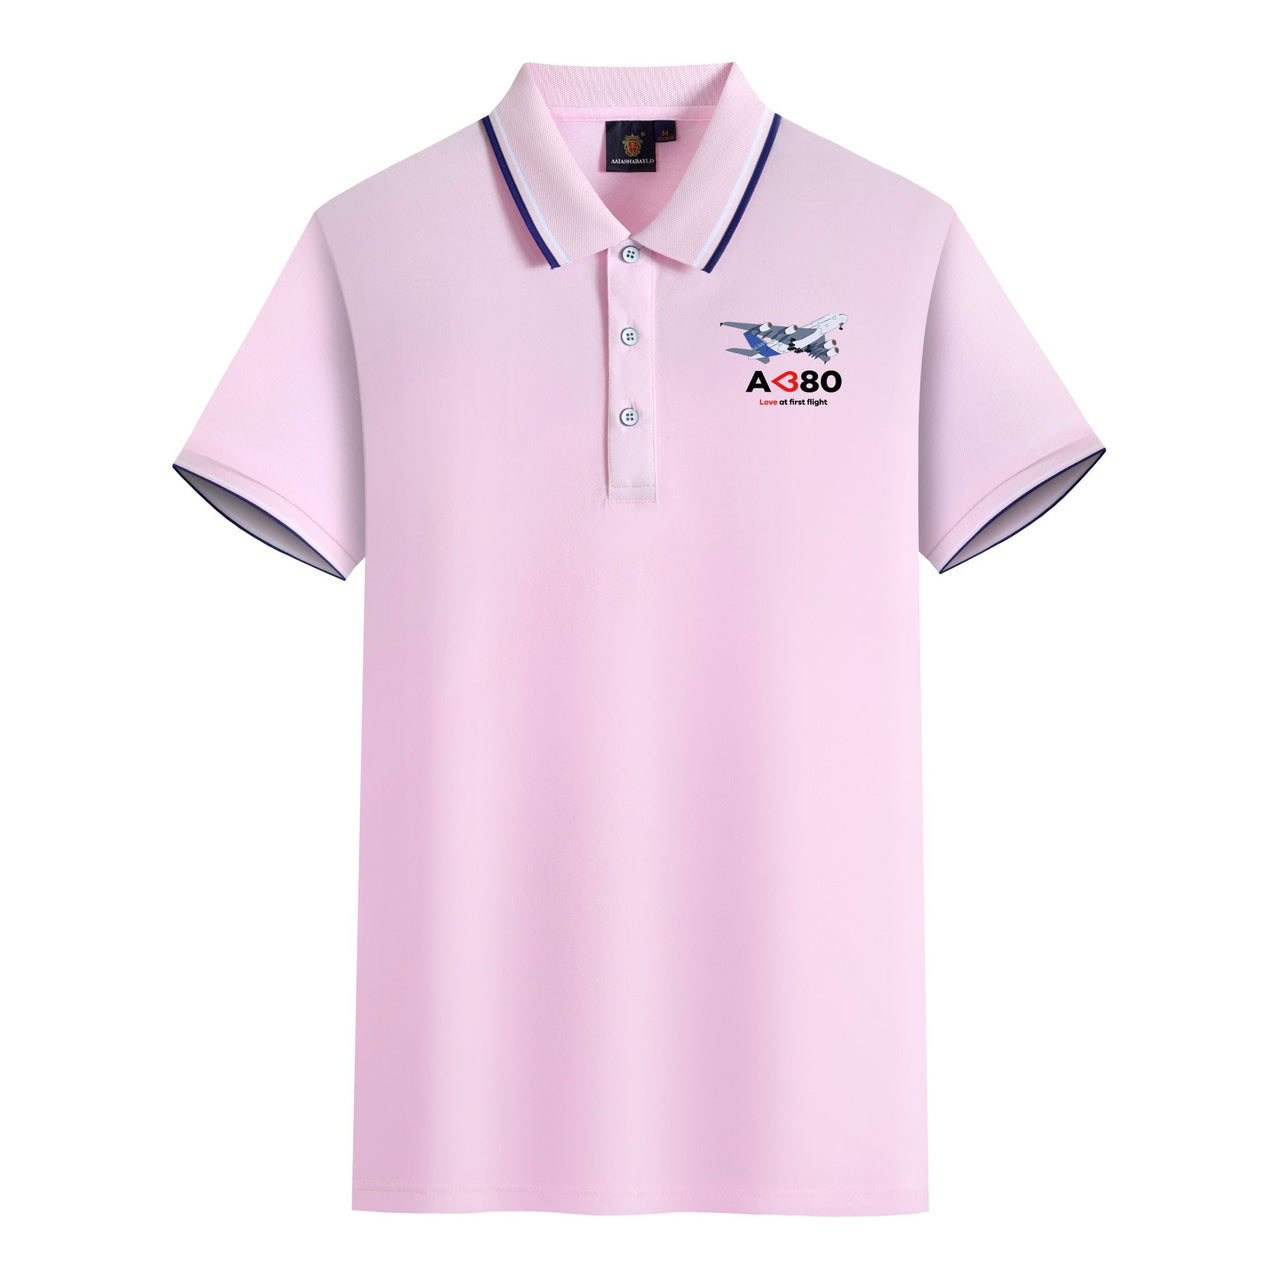 Airbus A380 Love at first flight Designed Stylish Polo T-Shirts